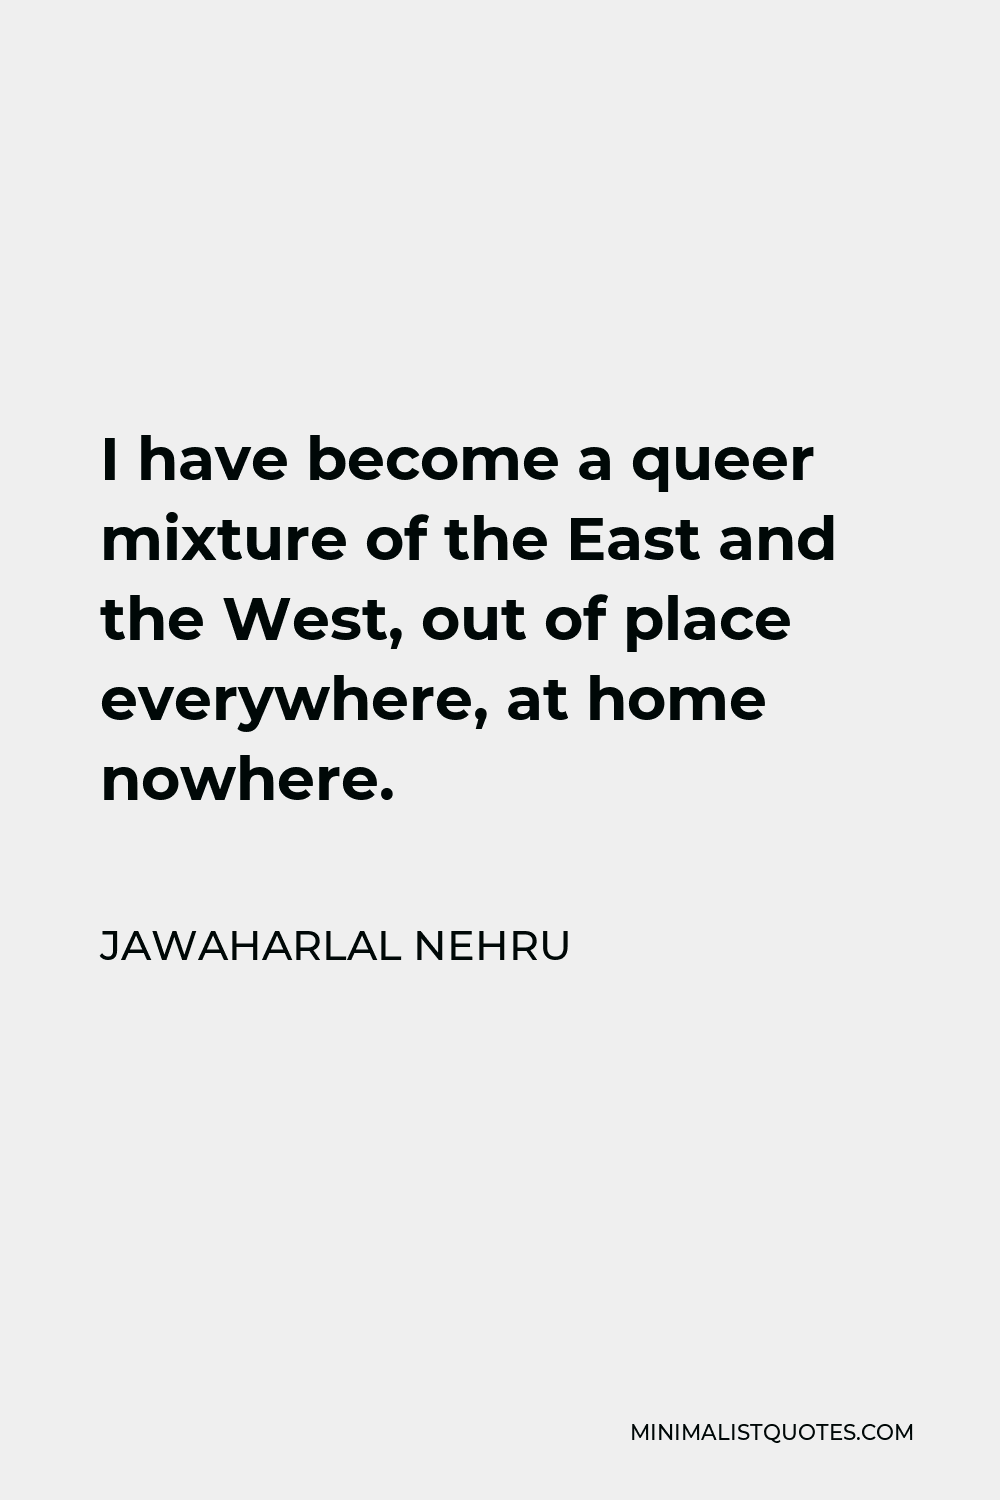 Jawaharlal Nehru Quote - I have become a queer mixture of the East and the West, out of place everywhere, at home nowhere.